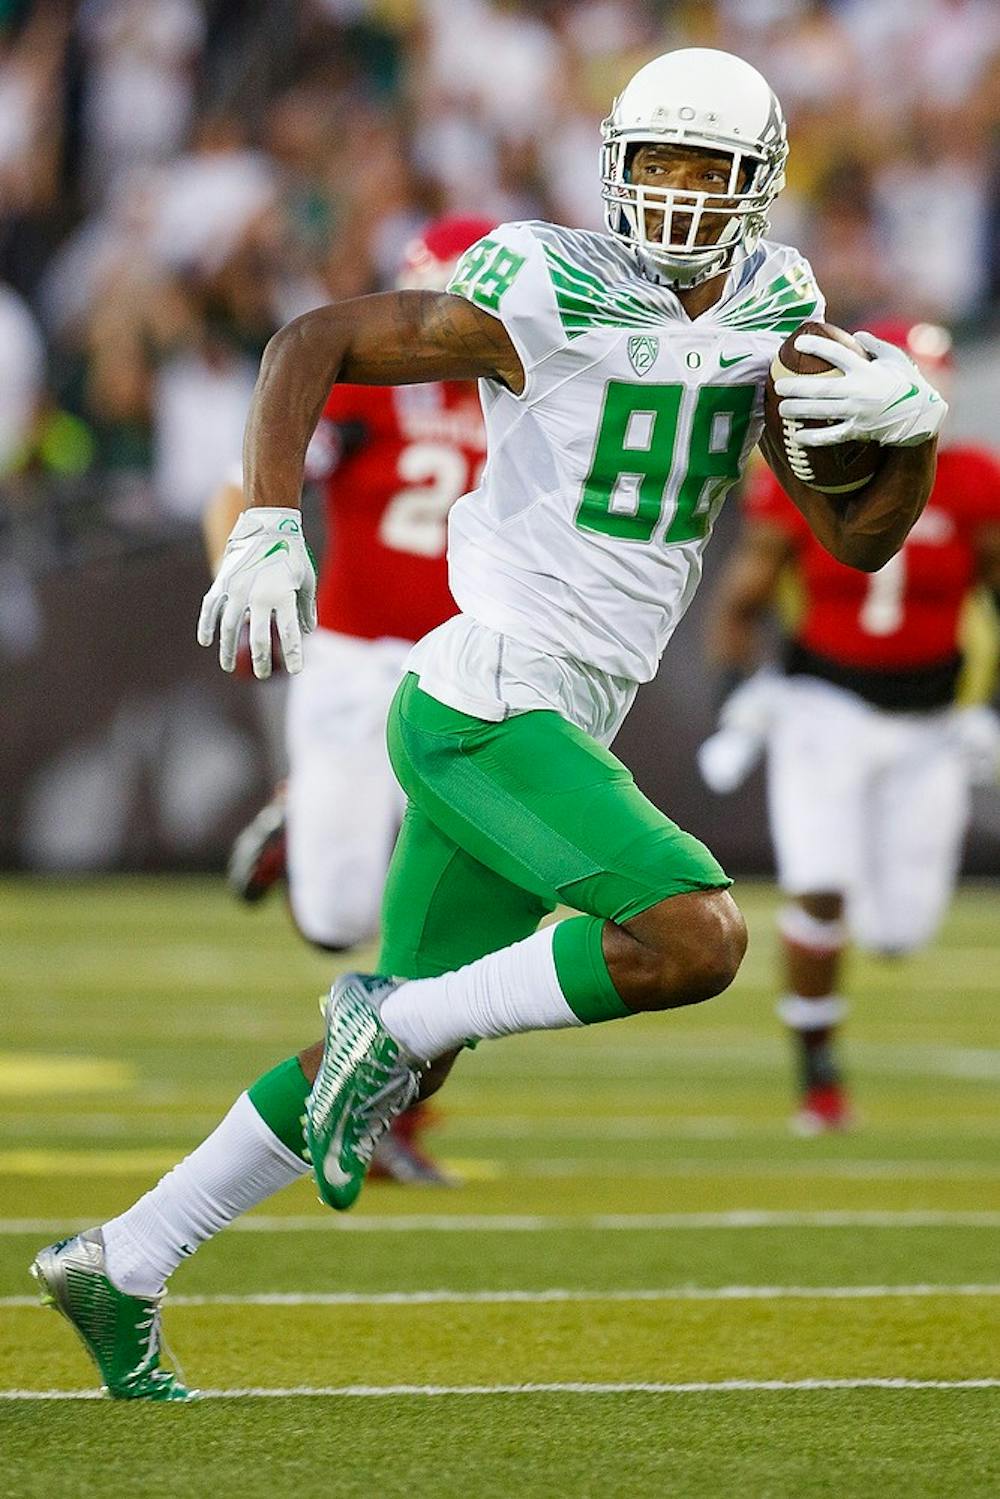 <p>Oregon wide receiver Dwayne Stanford looks back as he sprints into the end zone to score a touchdown during the game against South Dakota Coyotes at Autzen Stadium in Eugene, Oregon on Aug. 30, 2014. Photo courtesy of Taylor Wilder/Emerald</p>